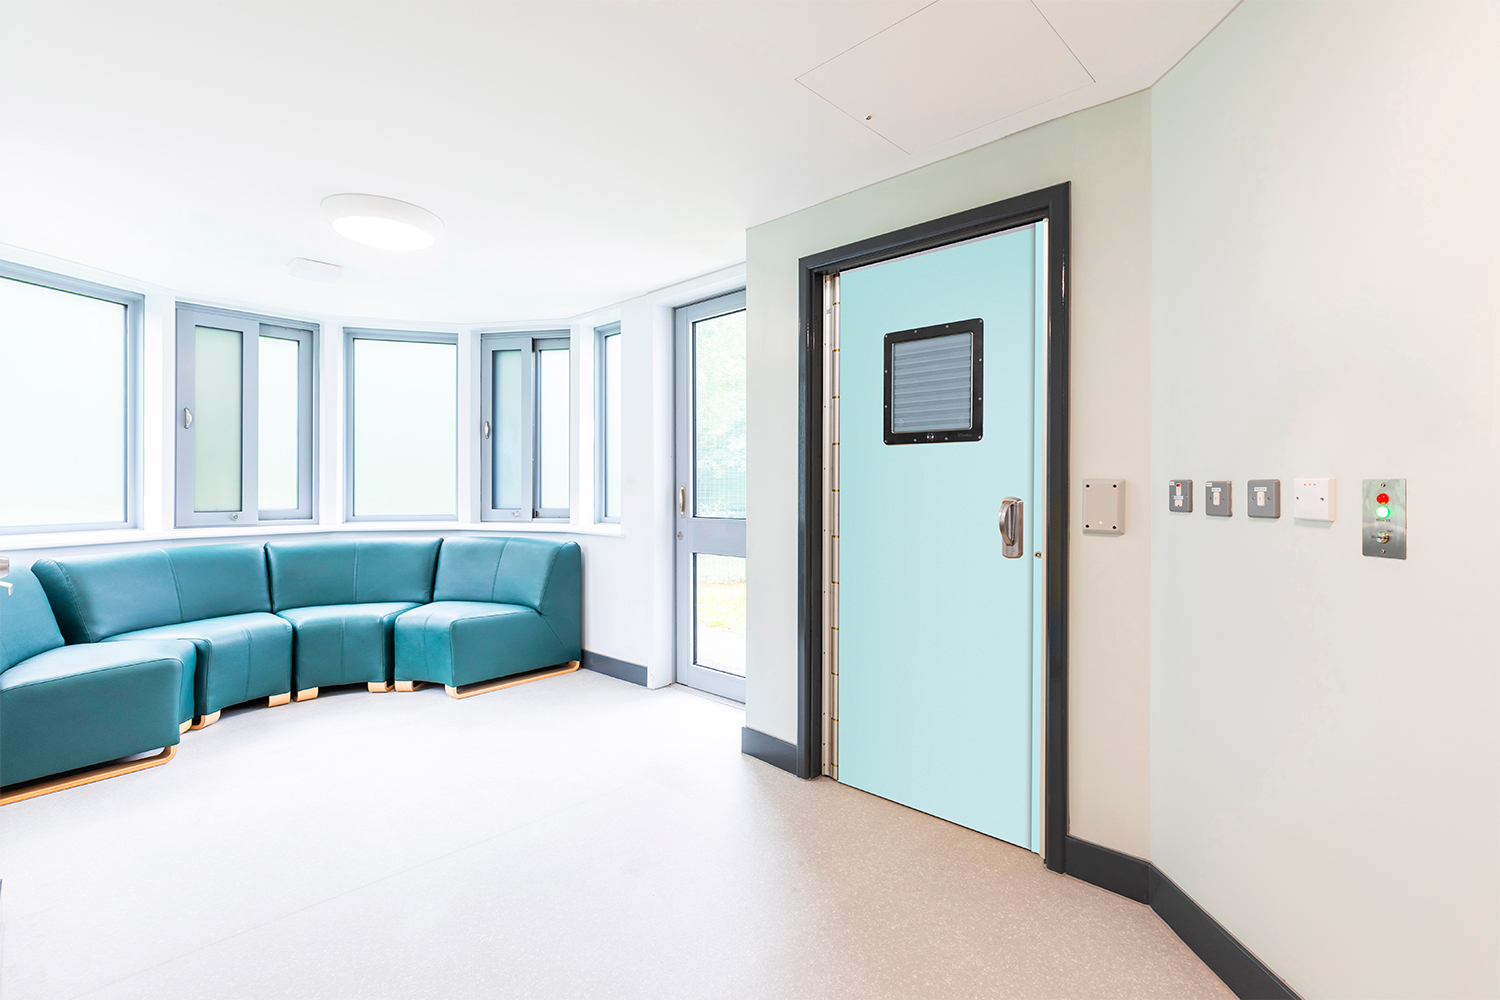 Kingsway Group's anti-barricade doors are available in the USA to help improve patient safety in behavioral health facilities.